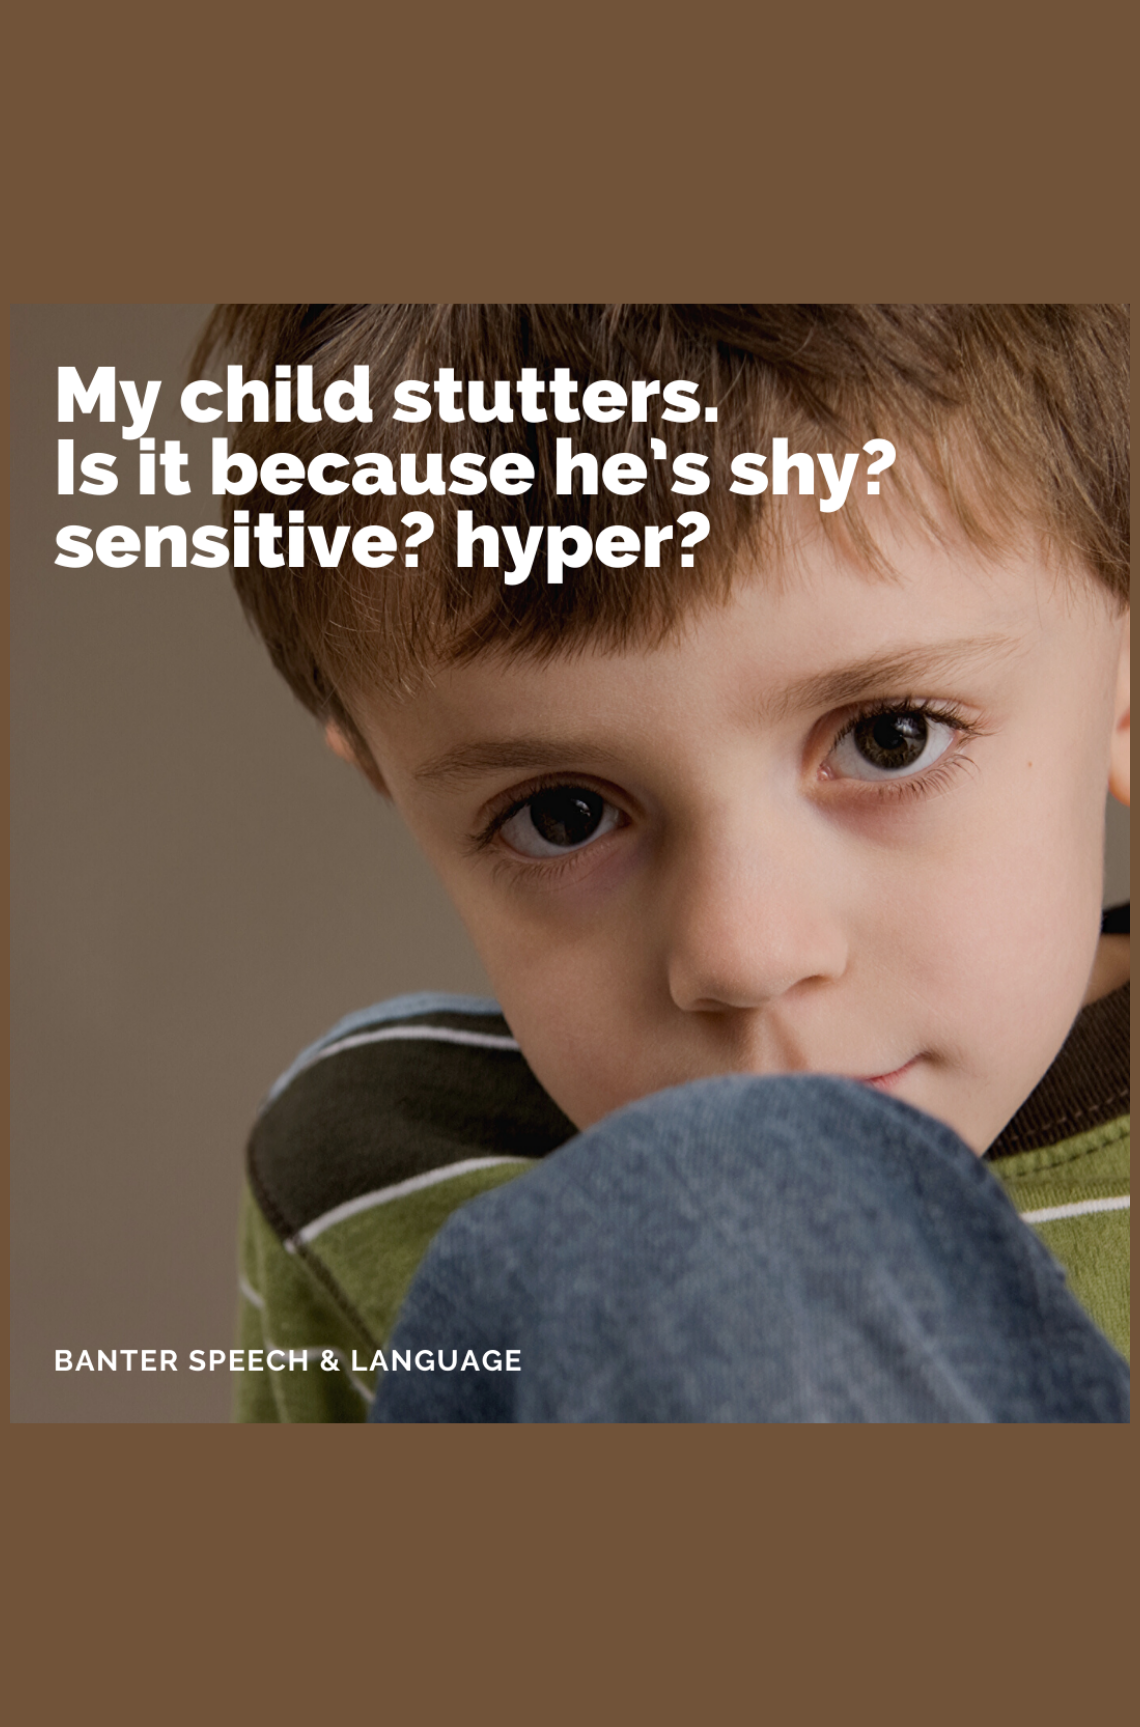 My child stutters. Is it because he's shy? sensitive? hyper?